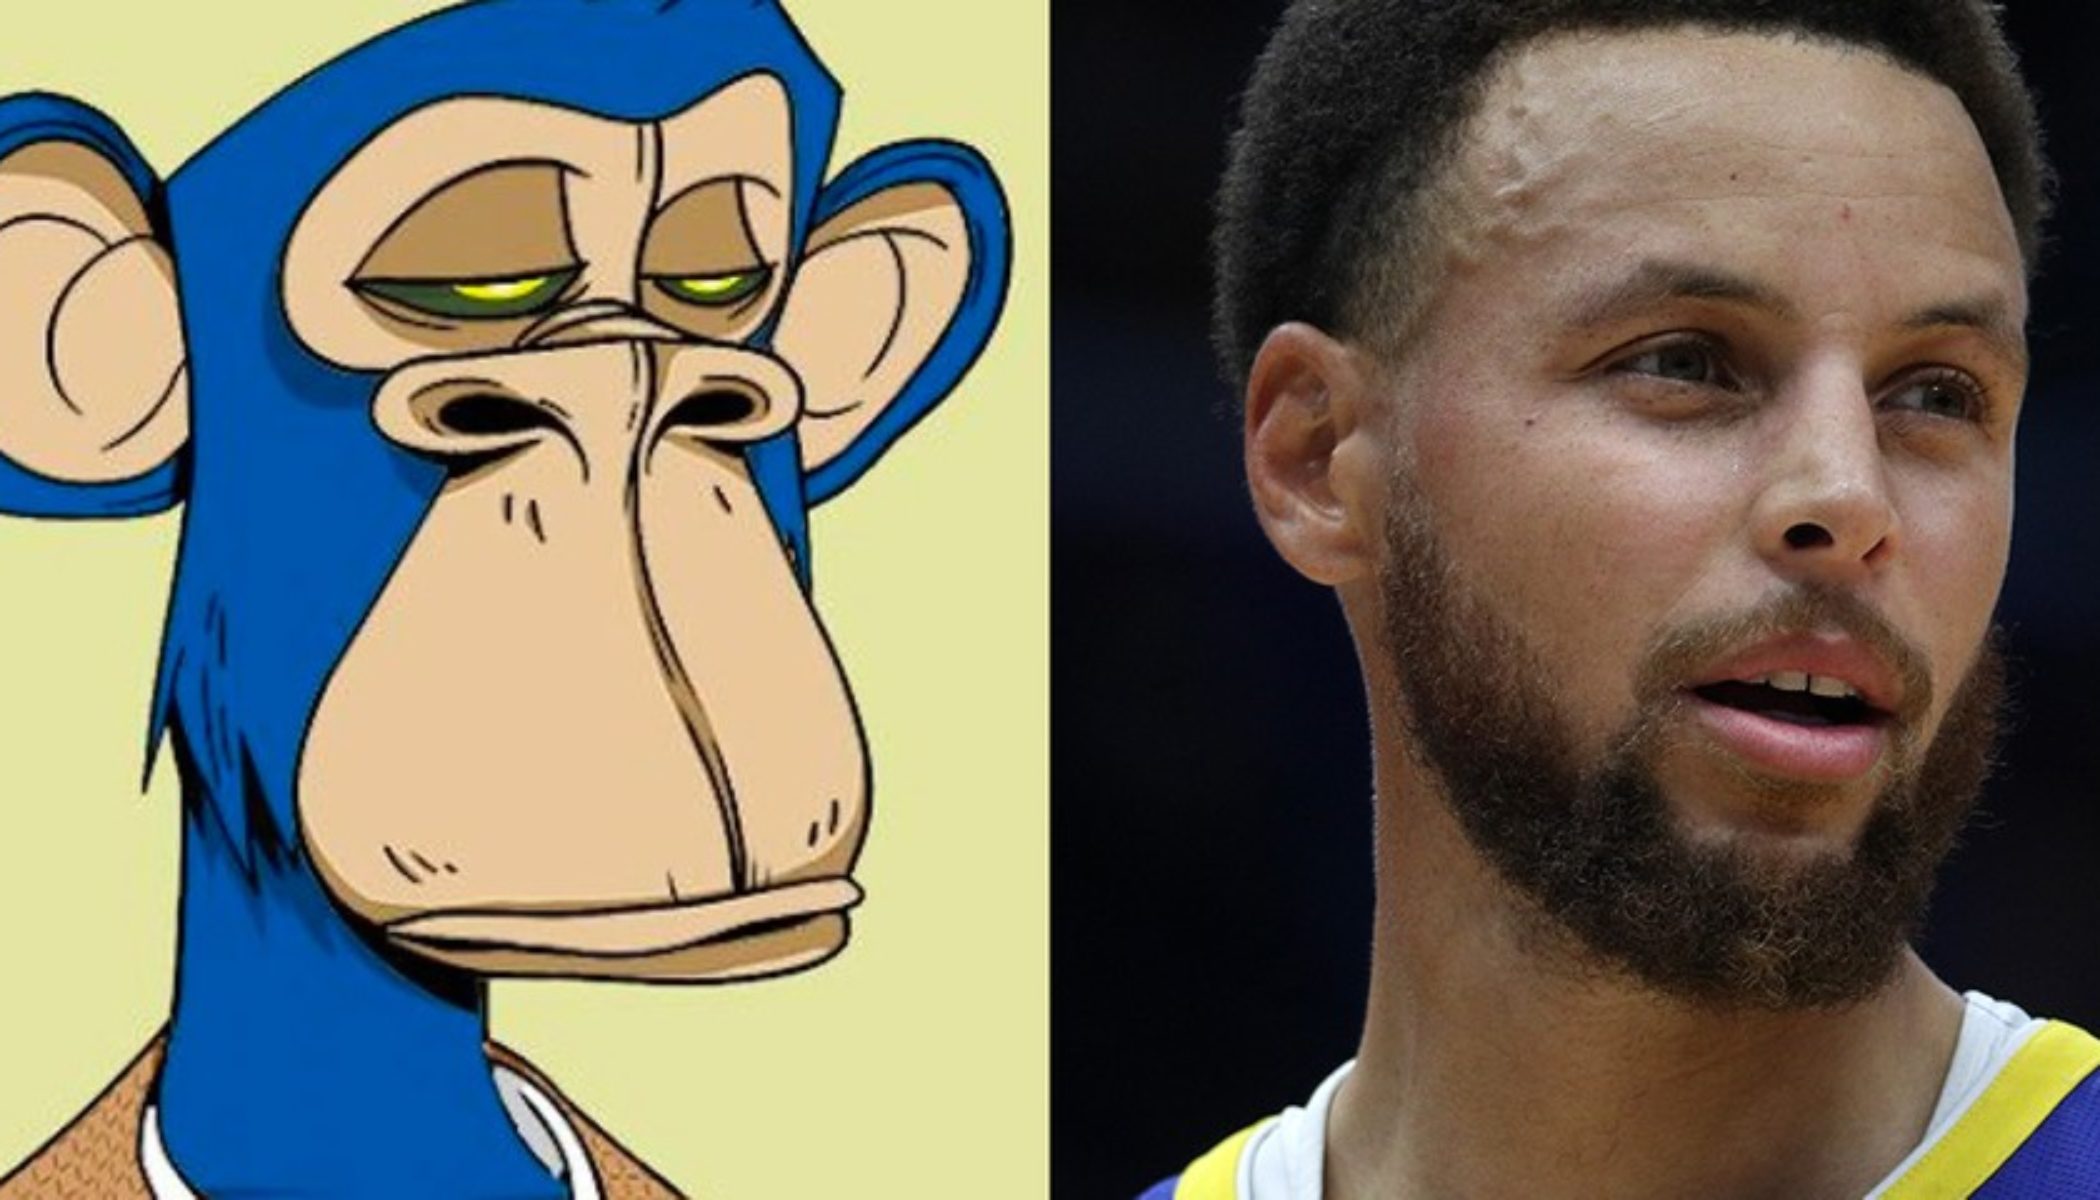 Steph Curry Just Bought a Bored Ape Yacht Club NFT for $180,000 USD